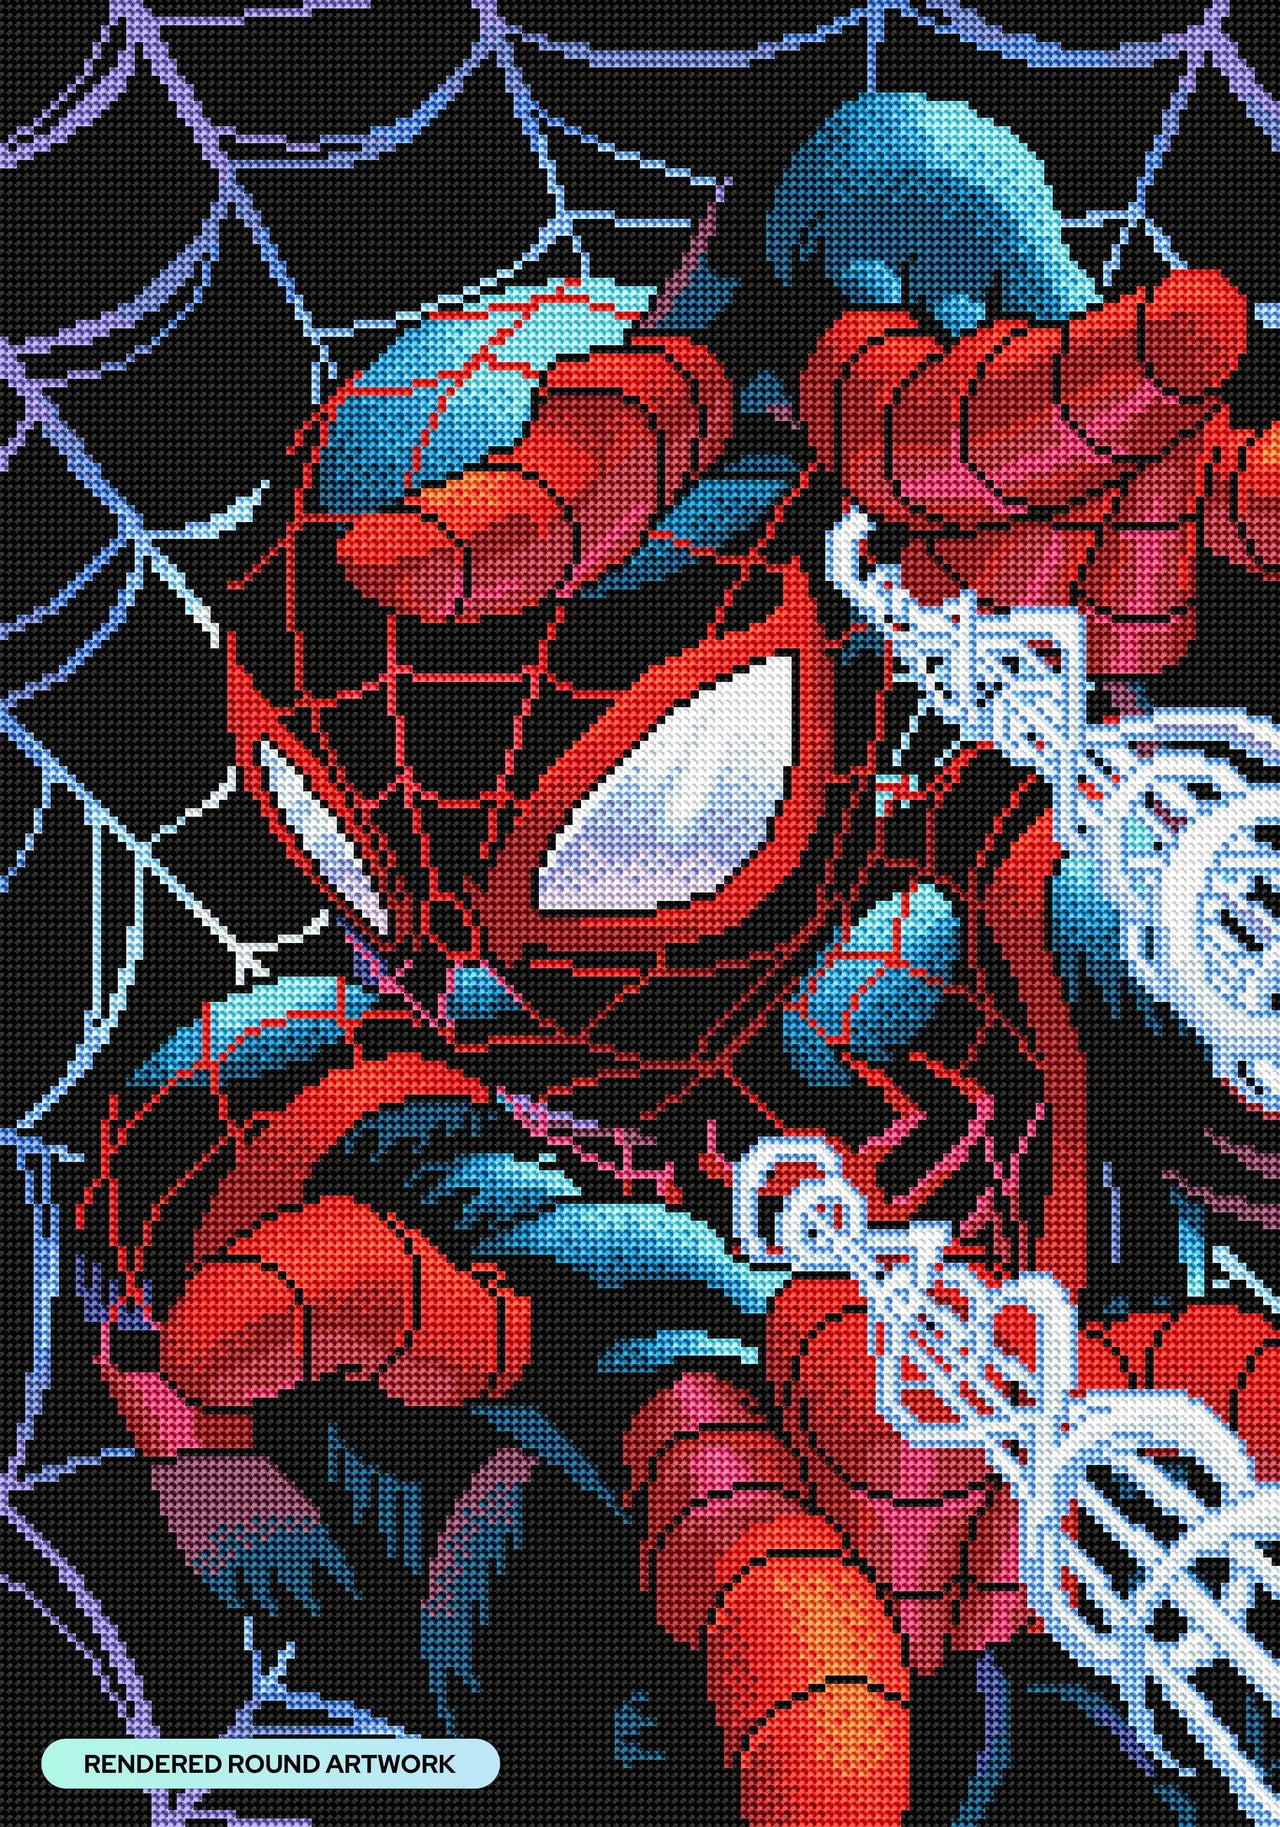 Diamond Painting Miles Morales™ 17" x 24" (42.6cm x 60.8cm) / Round With 28 Colors Including 2 ABs and 1 Fairy Dust Diamonds / 32,984